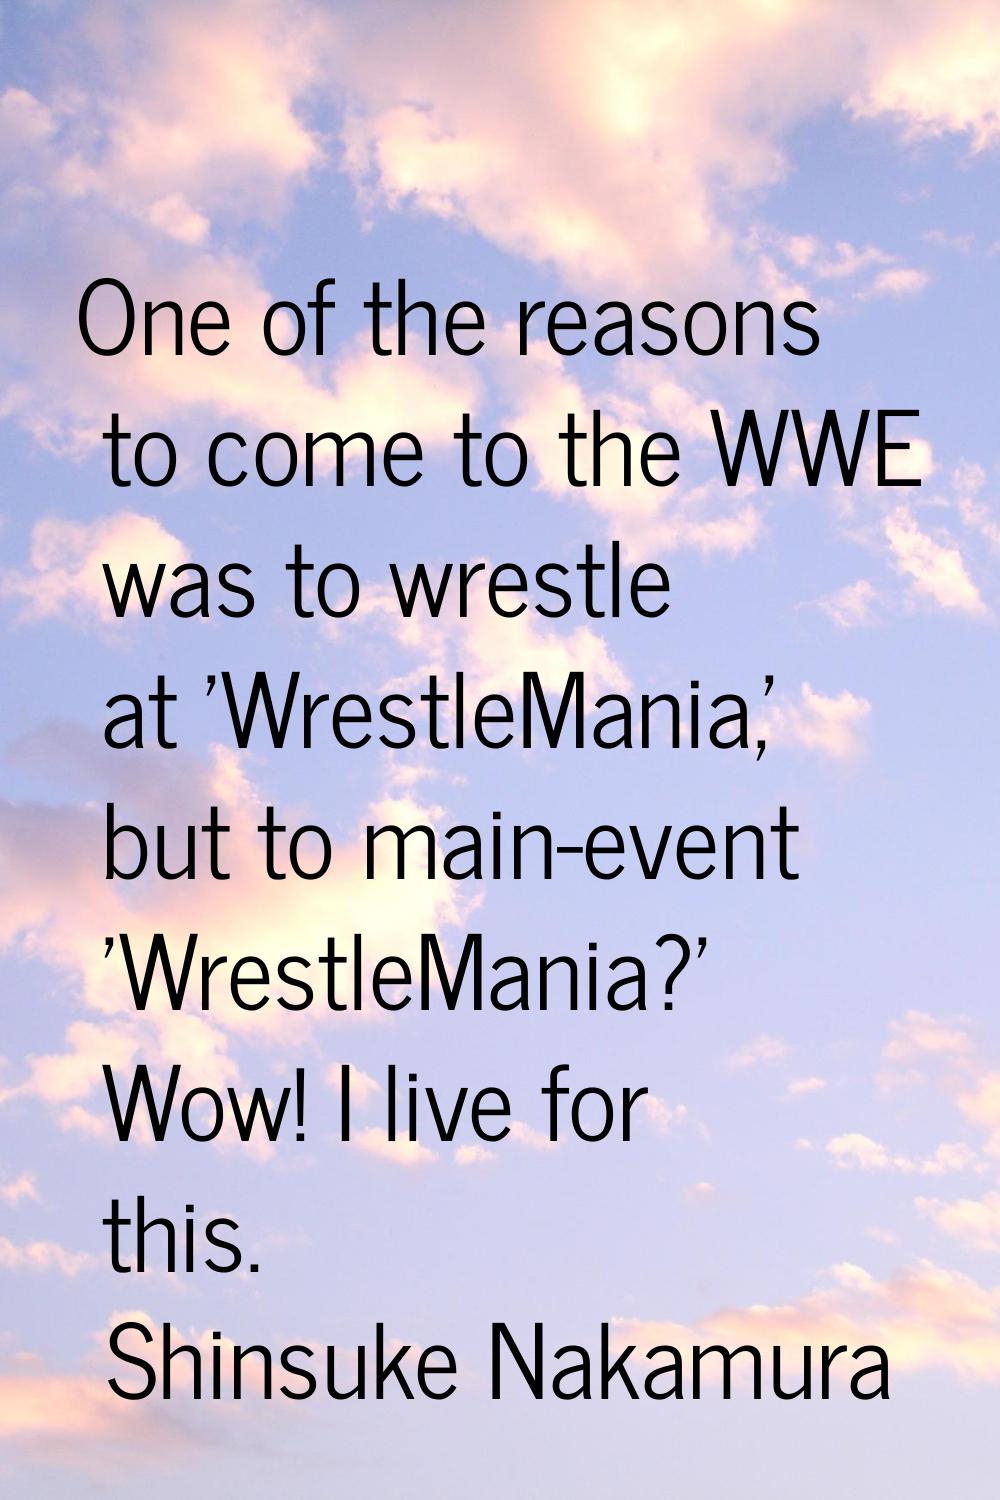 One of the reasons to come to the WWE was to wrestle at 'WrestleMania,' but to main-event 'WrestleM